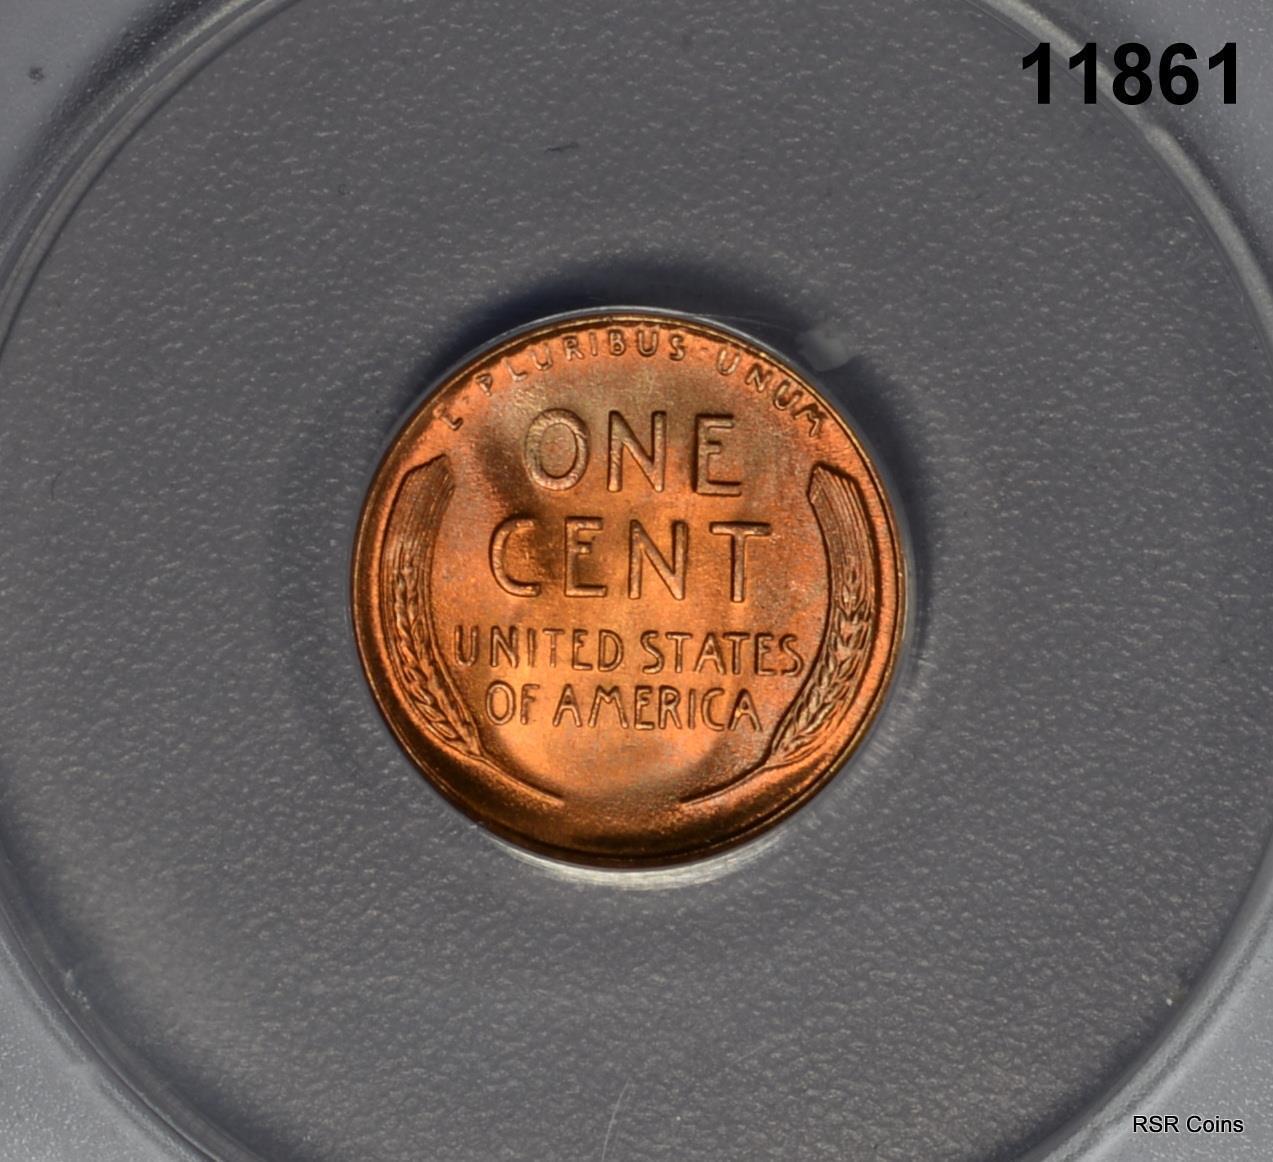 1947 D LINCOLN CENT ANACS CERTIFIED MS66 RD! FINE RED! #11861